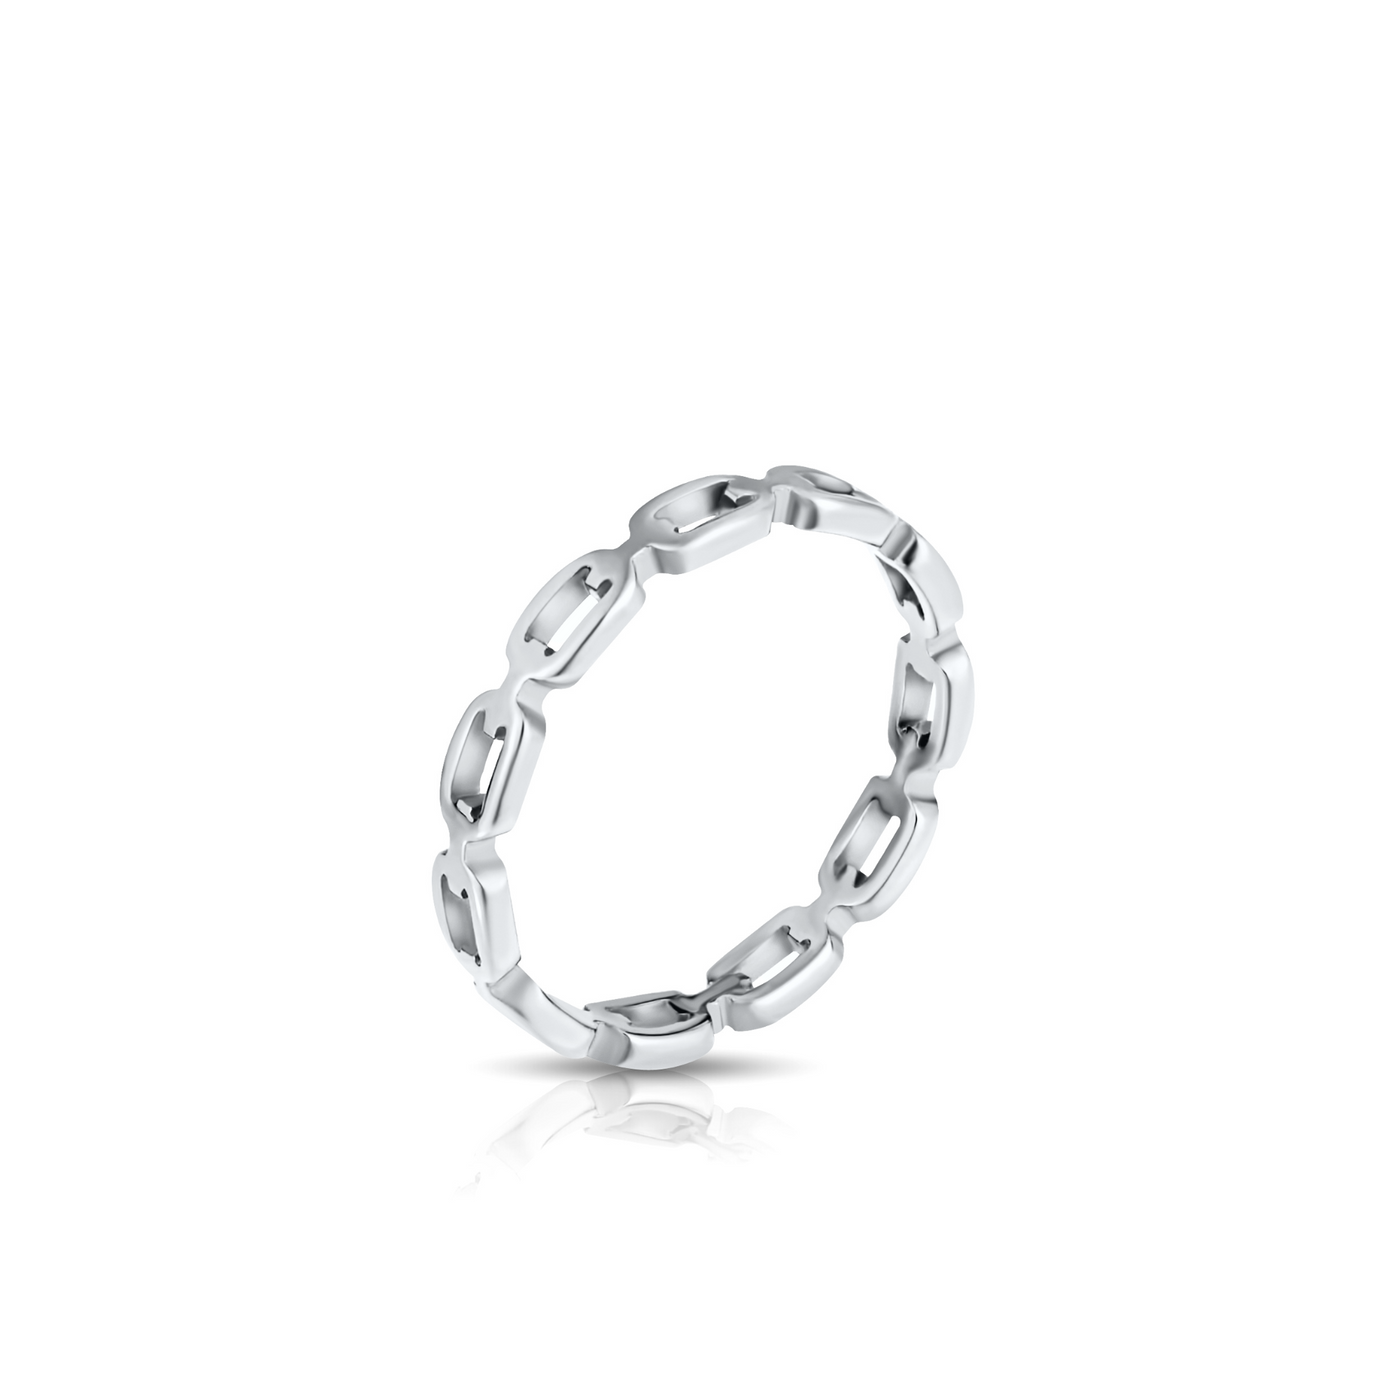 Billy Dainty Chain Ring - Ellie Vail